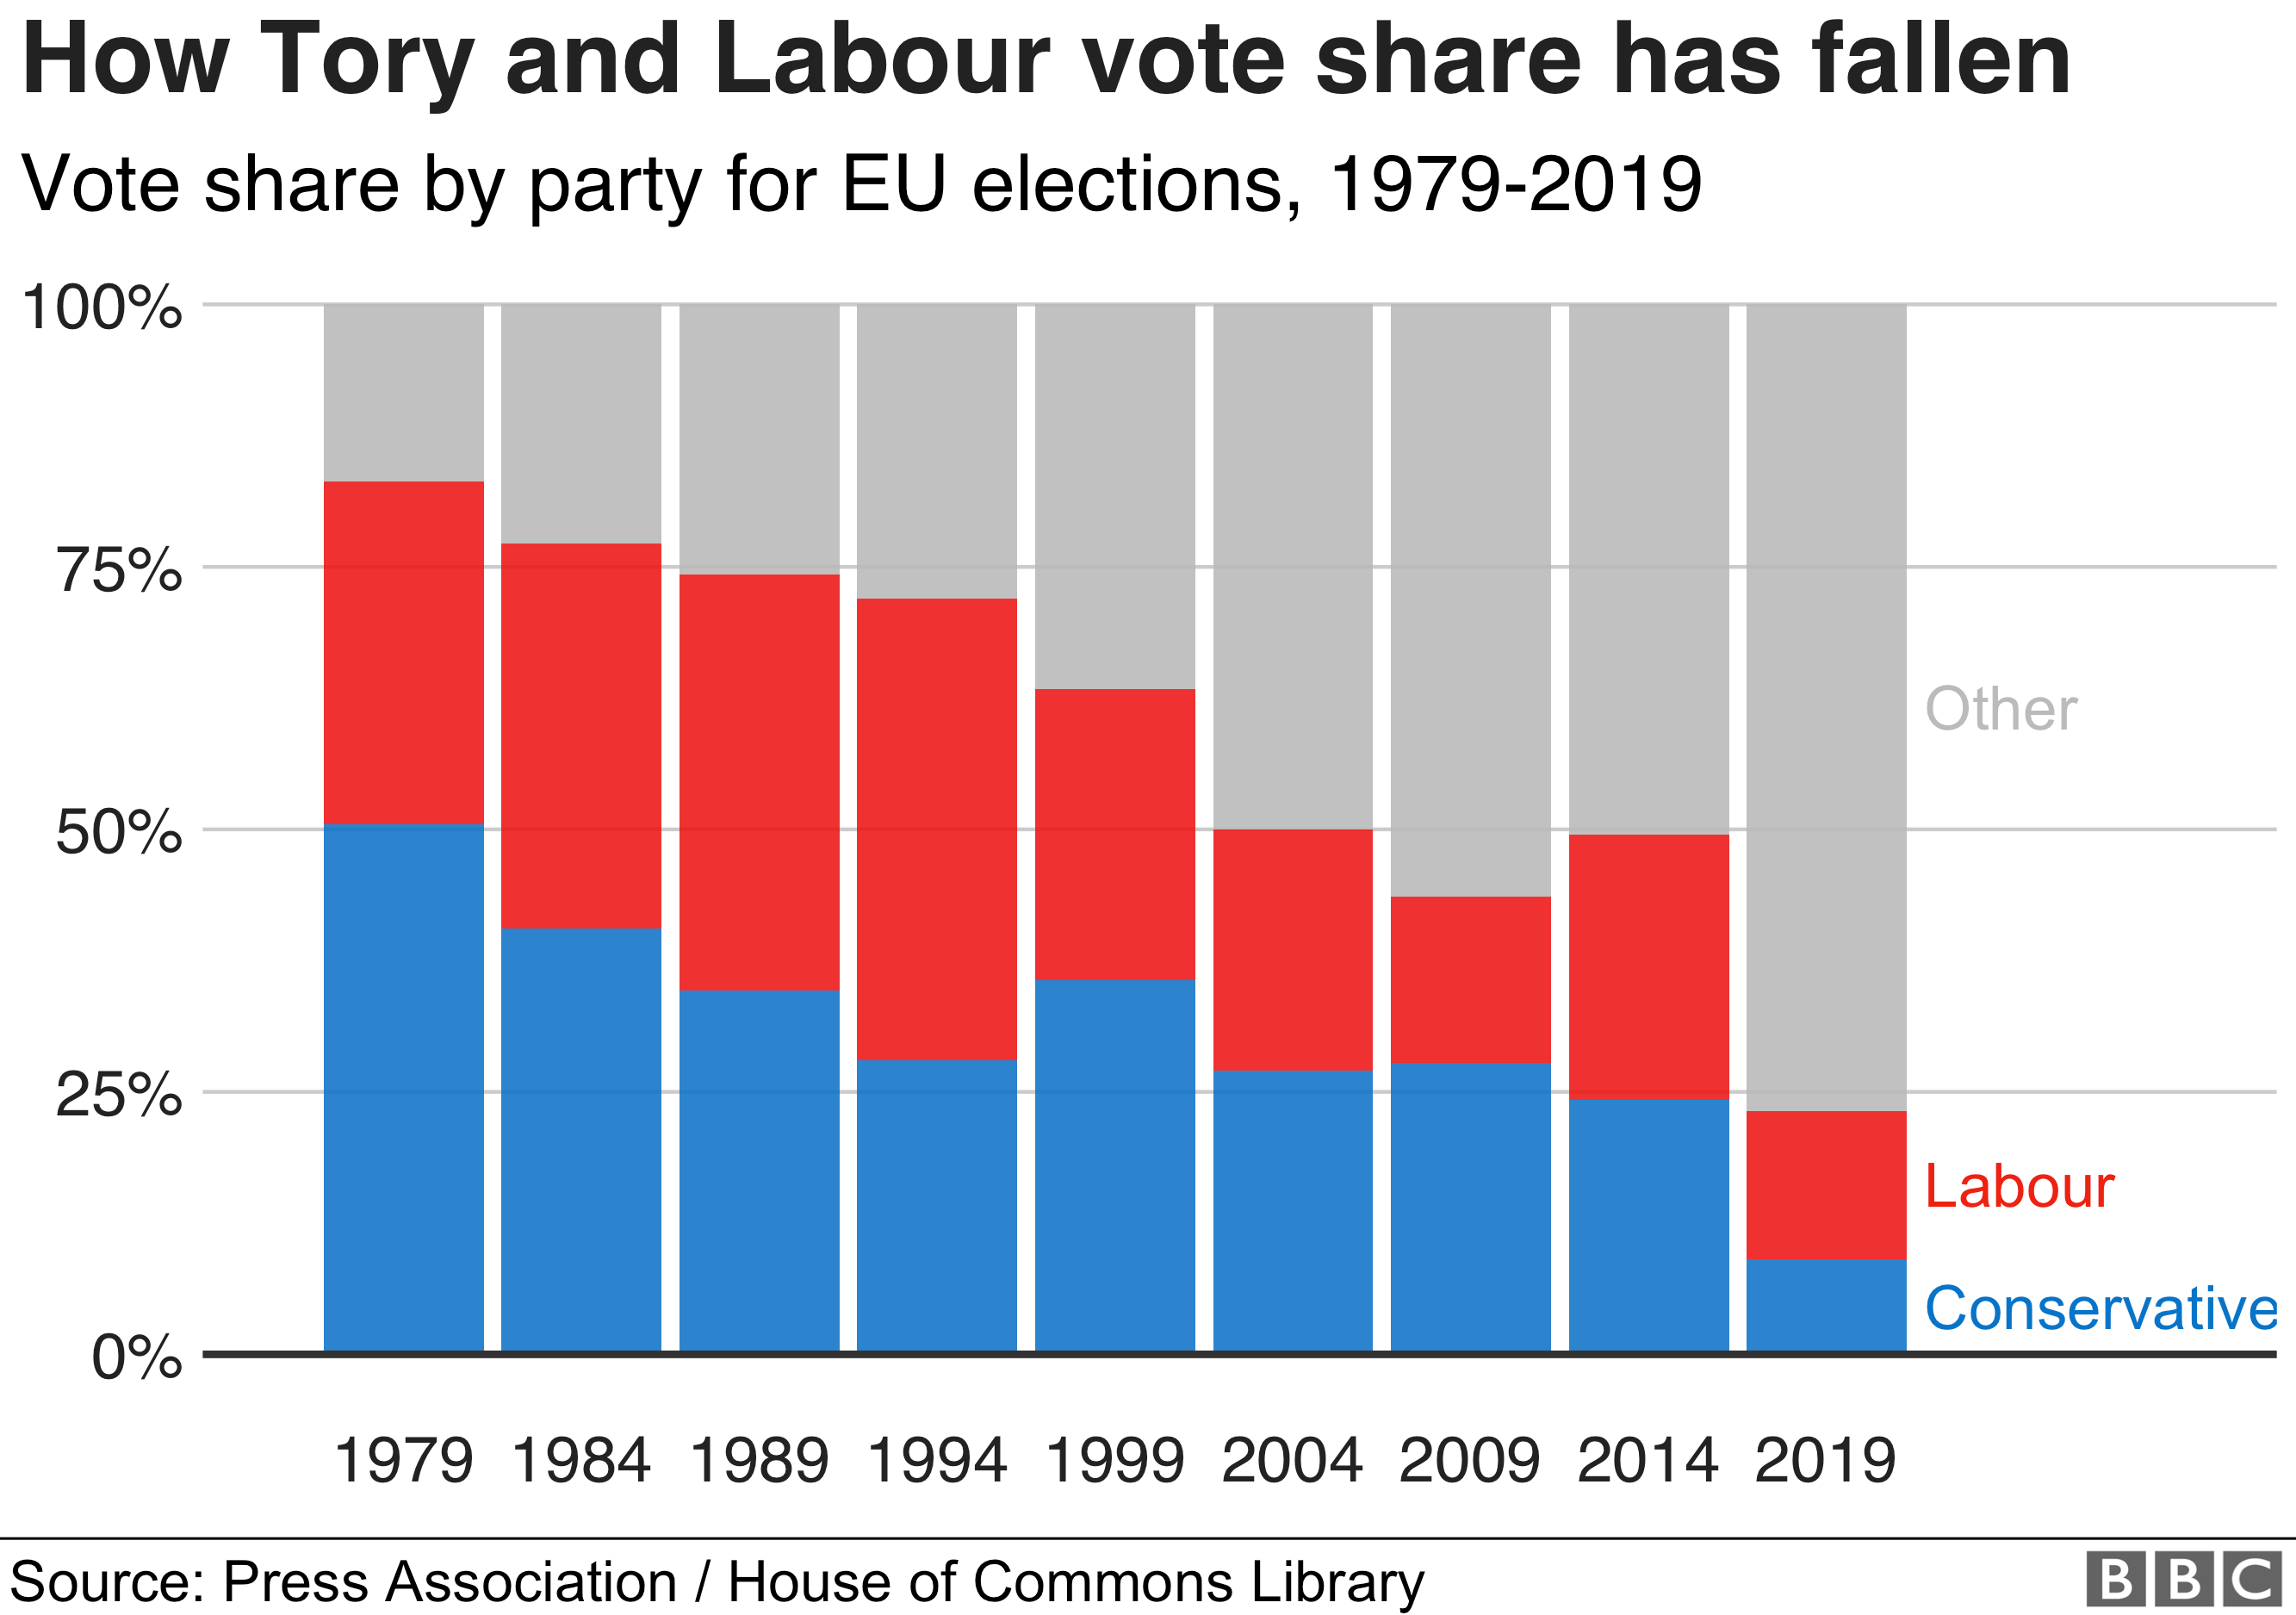 How Tory and Labour vote share has fallen to under 25% combined